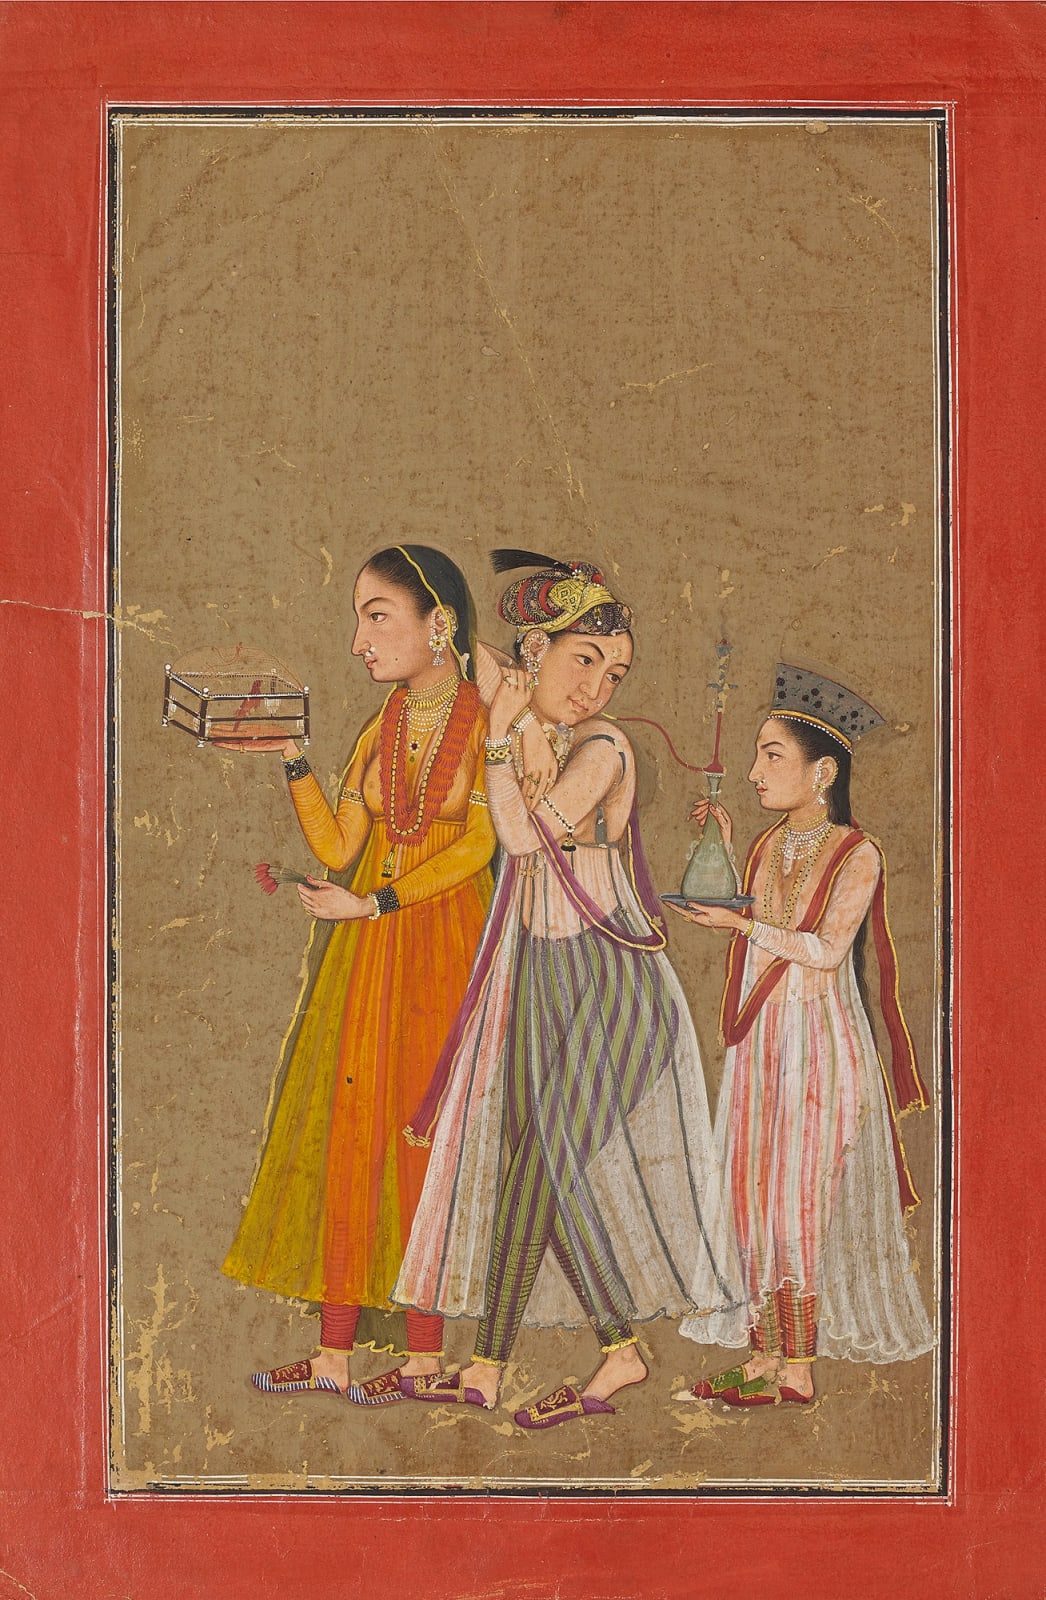 Zenana Women playing at cross dressing , Mandi, attributed to the Early Master at the Court of Mandi and/or his atelier, c.1650